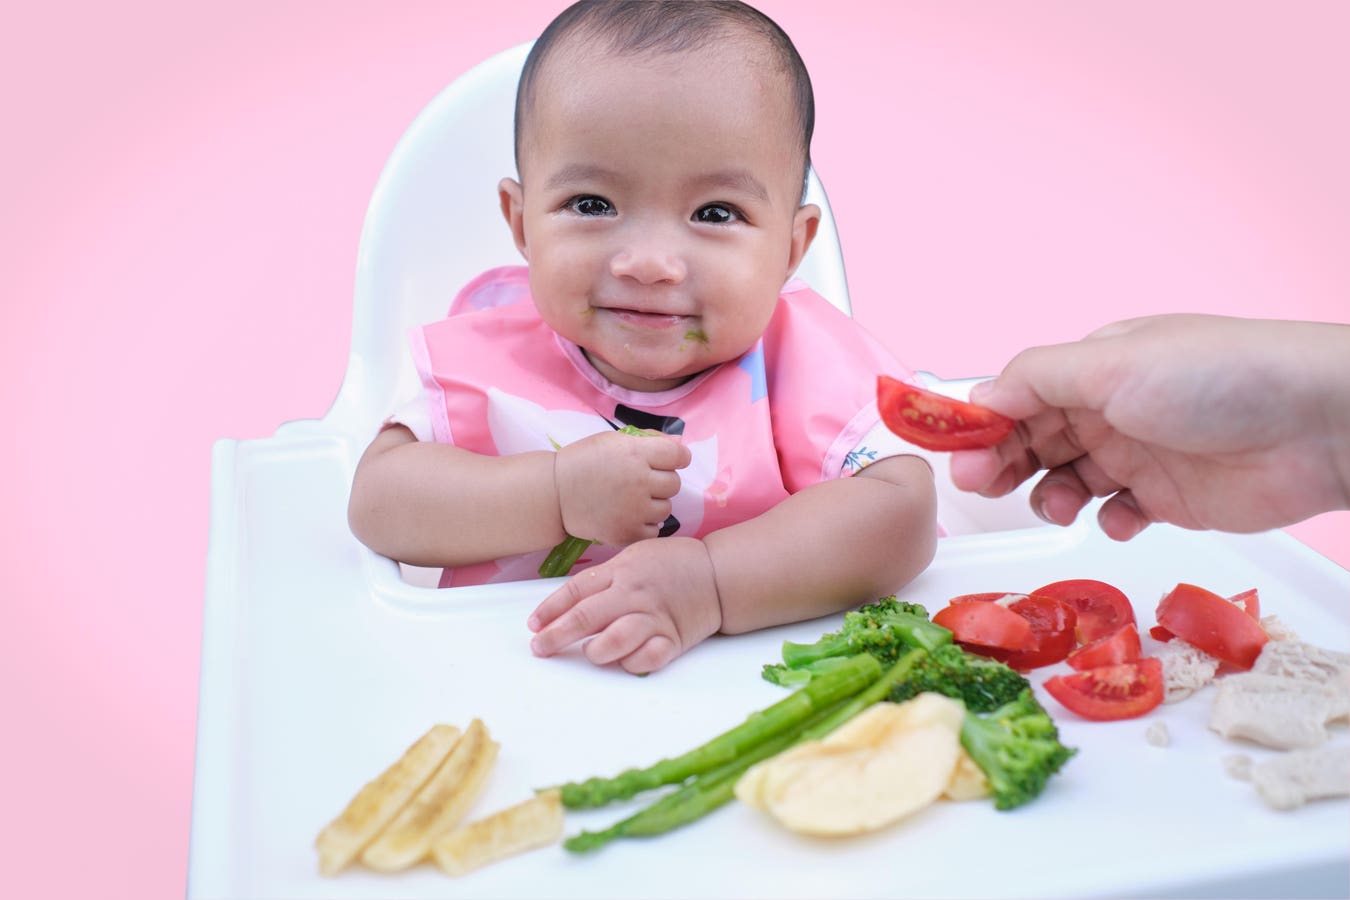 Baby-Led Weaning May Have Advantages In Growth Over Traditional Methods